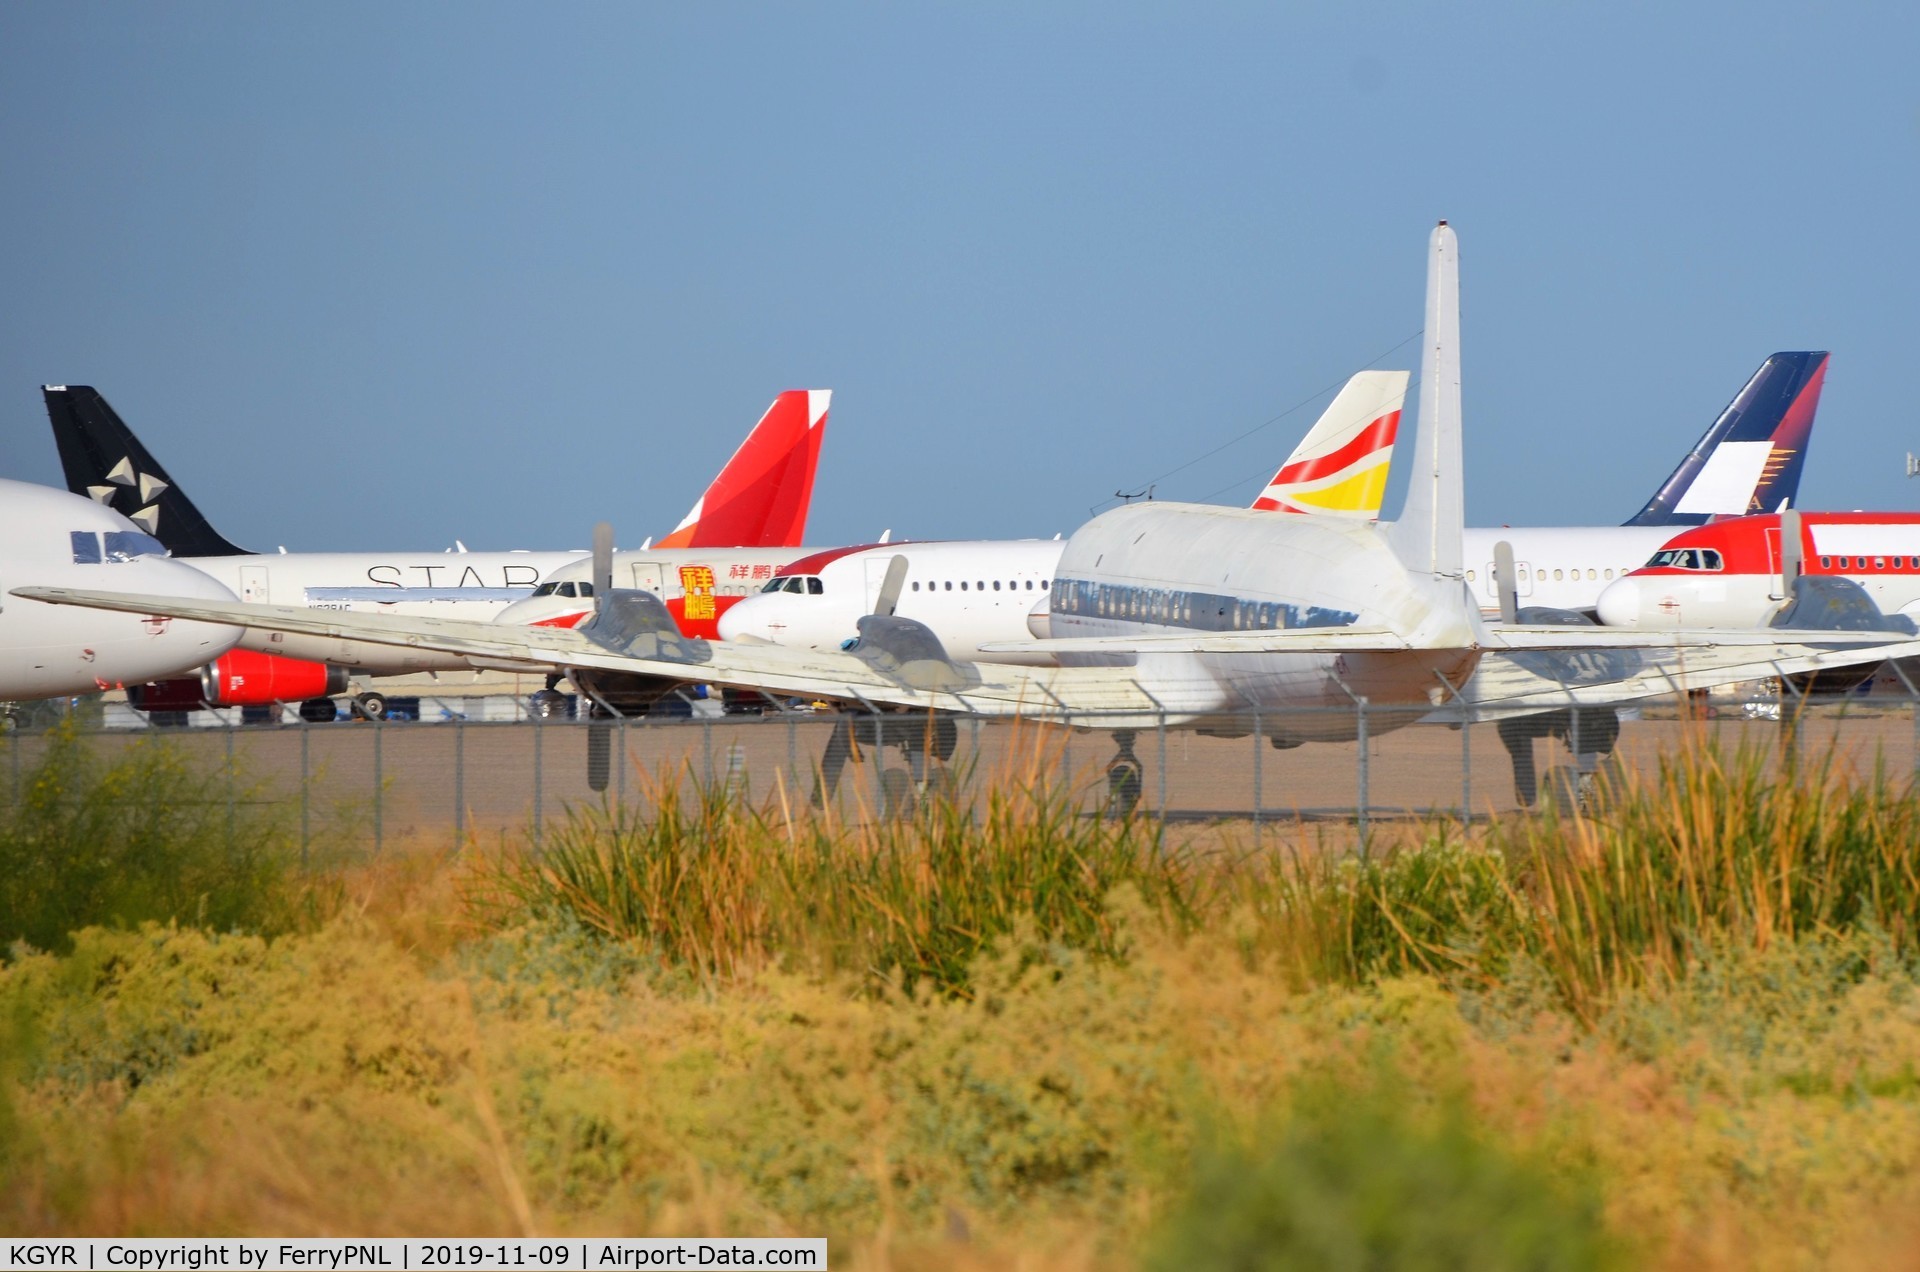 Phoenix Goodyear Airport (GYR) - Some of the aircraft stored in Goodyear Airport Arizona.